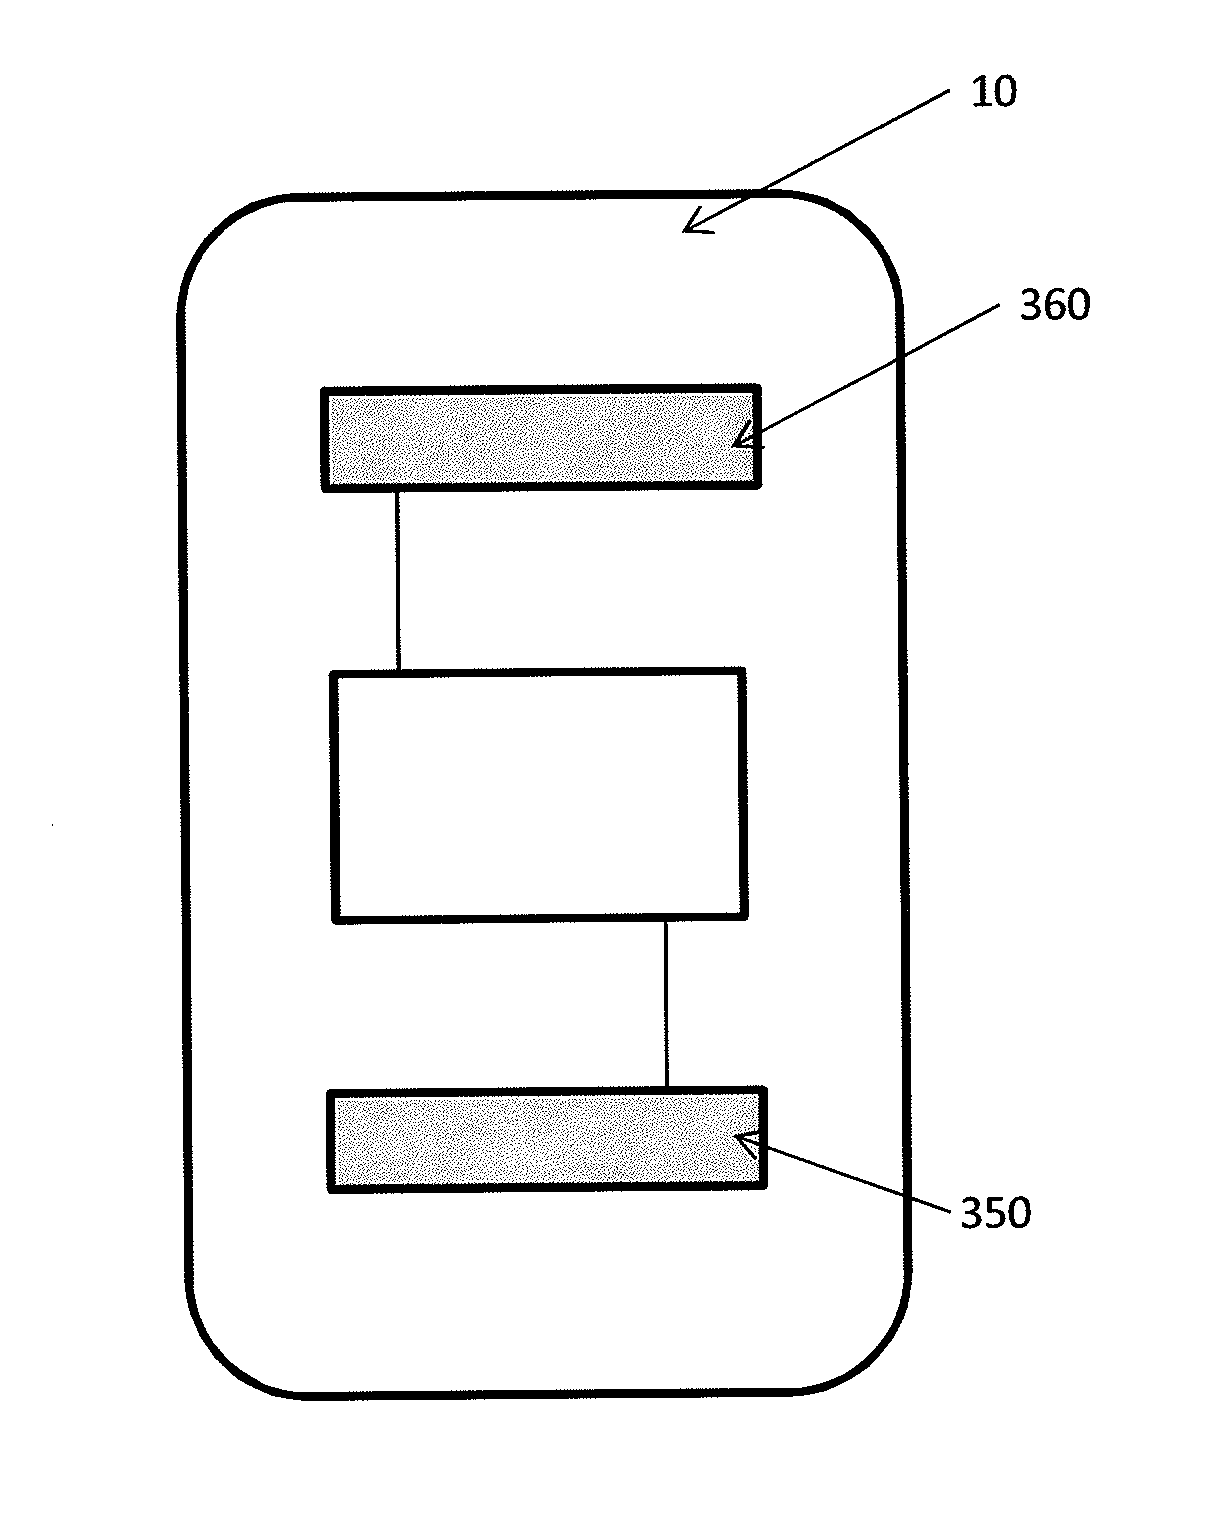 Cardiac performance monitoring system for use with mobile communications devices